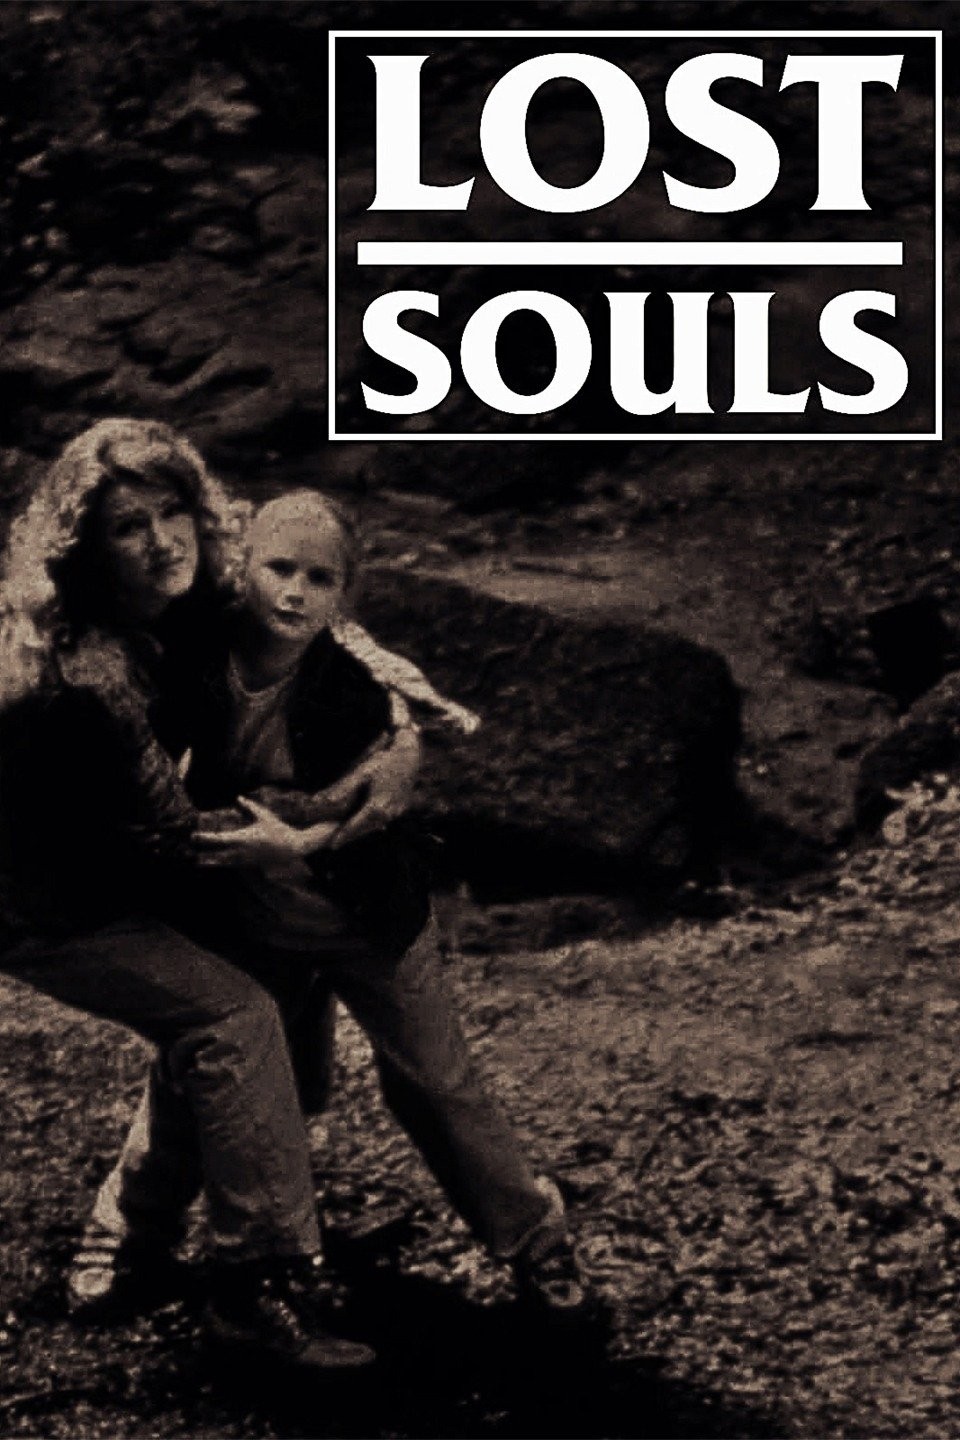 Lost Souls | Rotten Tomatoes